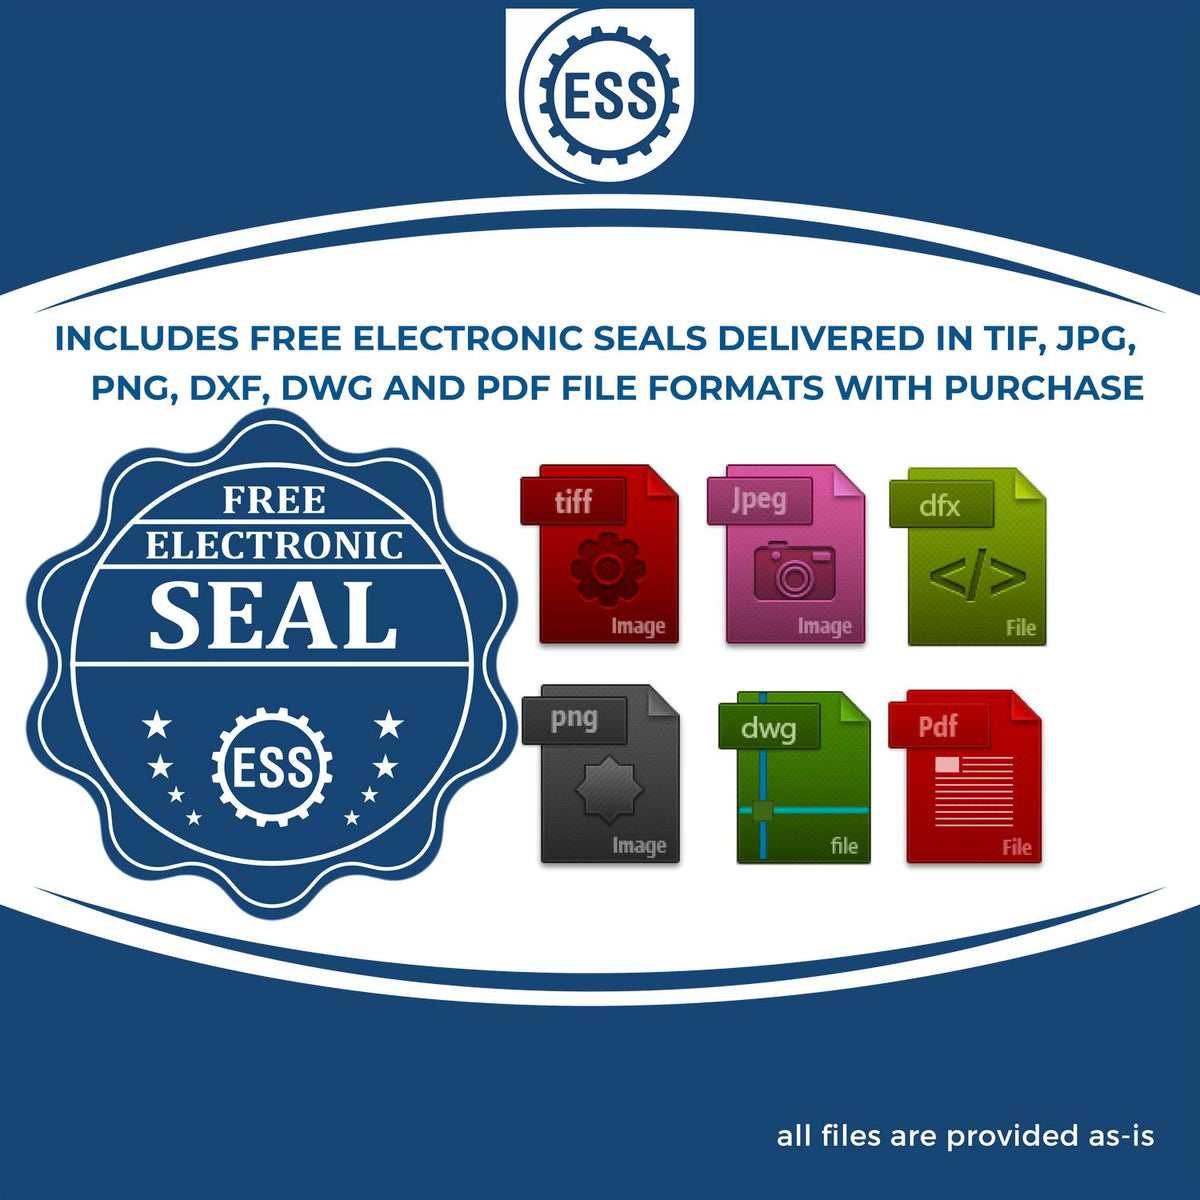 An infographic for the free electronic seal for the Gift Tennessee Landscape Architect Seal illustrating the different file type icons such as DXF, DWG, TIF, JPG and PNG.